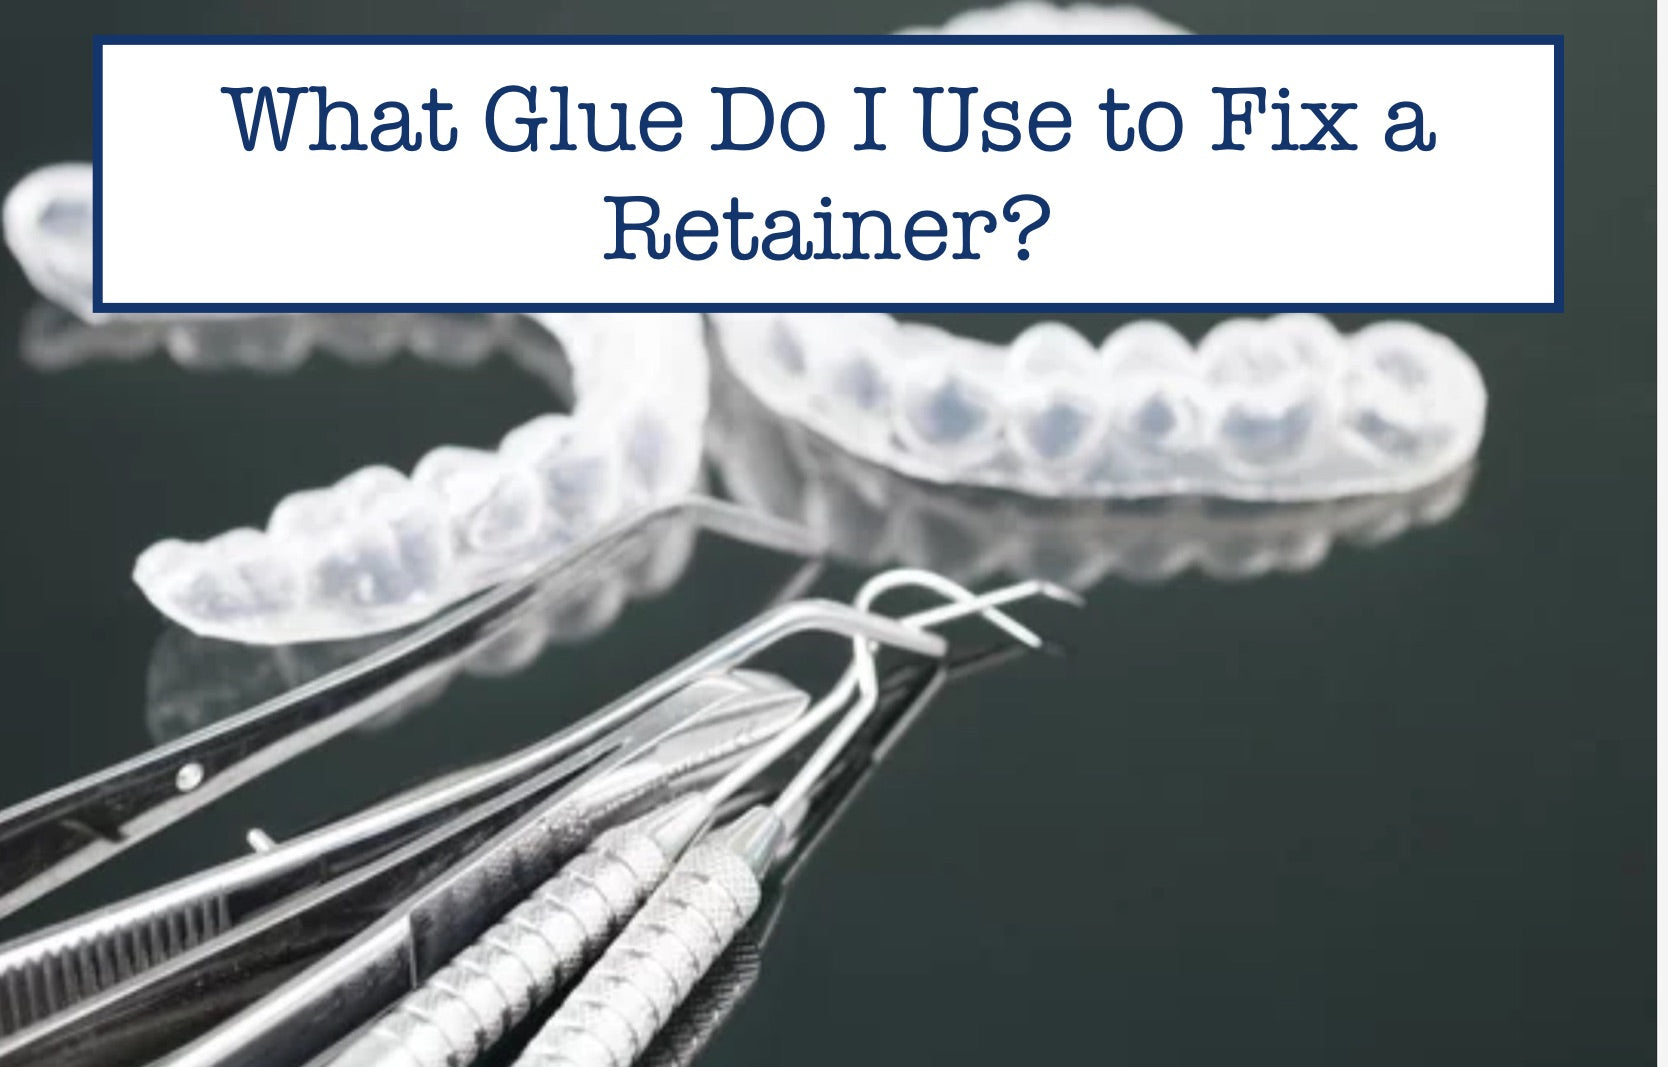 What Glue Do I Use to Fix a Retainer?